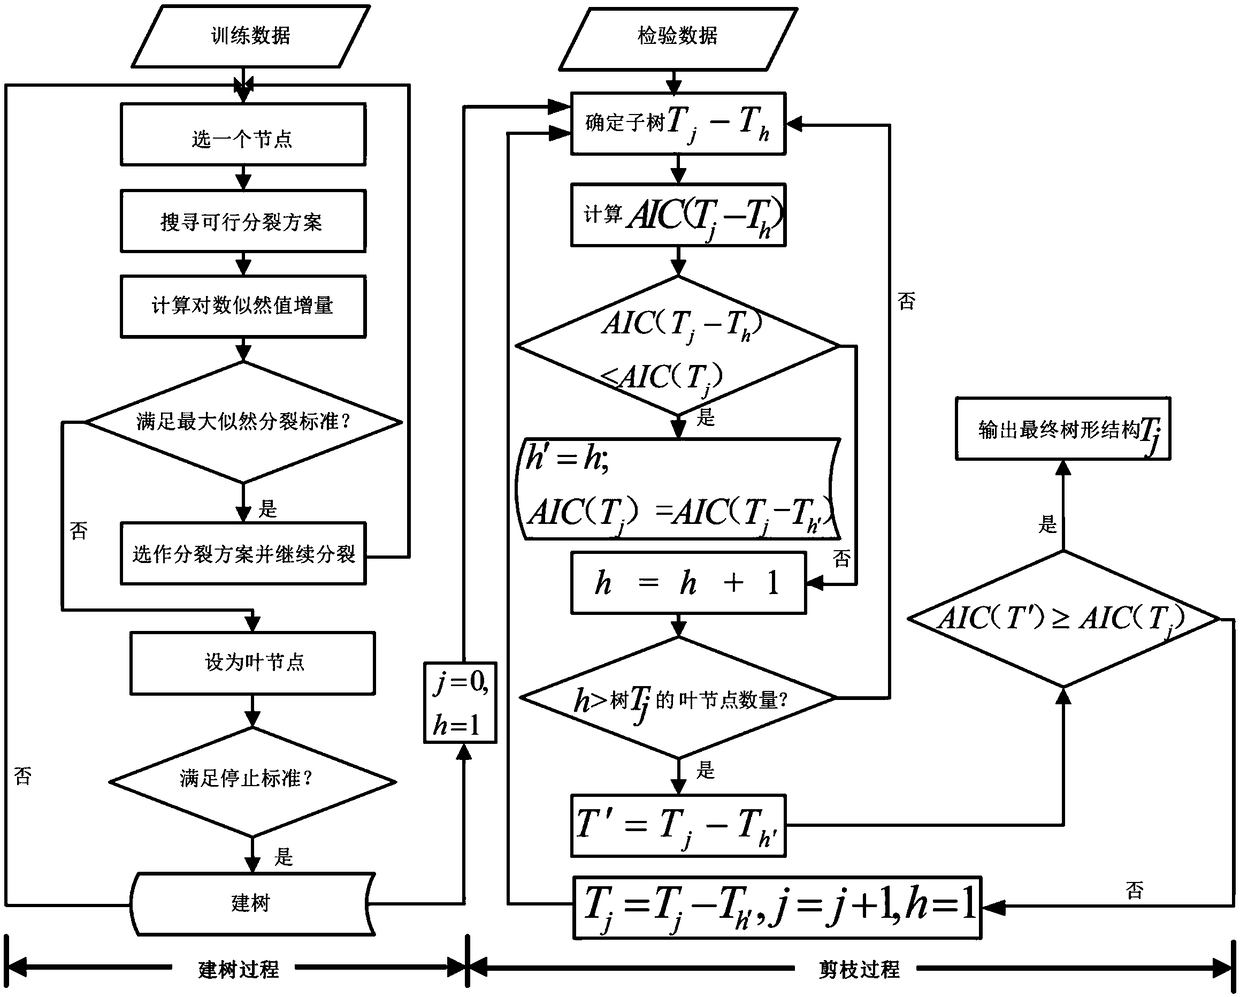 A metro accident delay time prediction method based on a maximum likelihood regression tree